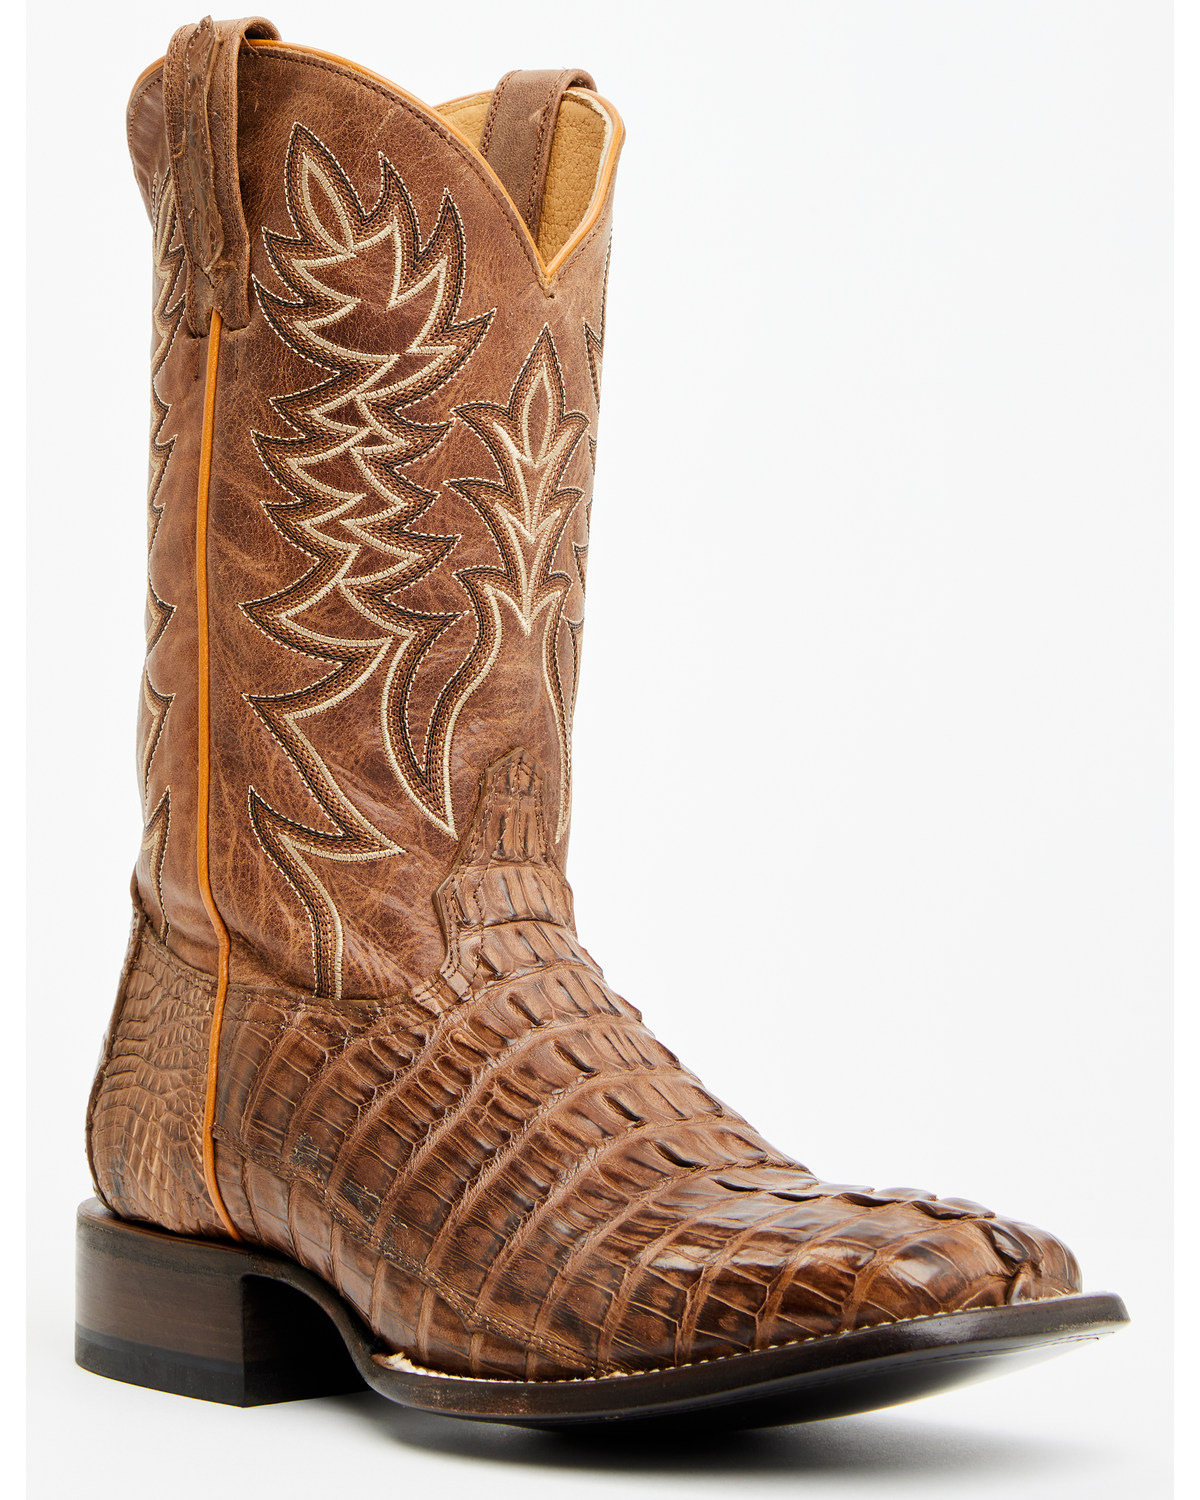 Cody James Men's Exotic Caiman Tail Western Boots - Broad Square Toe